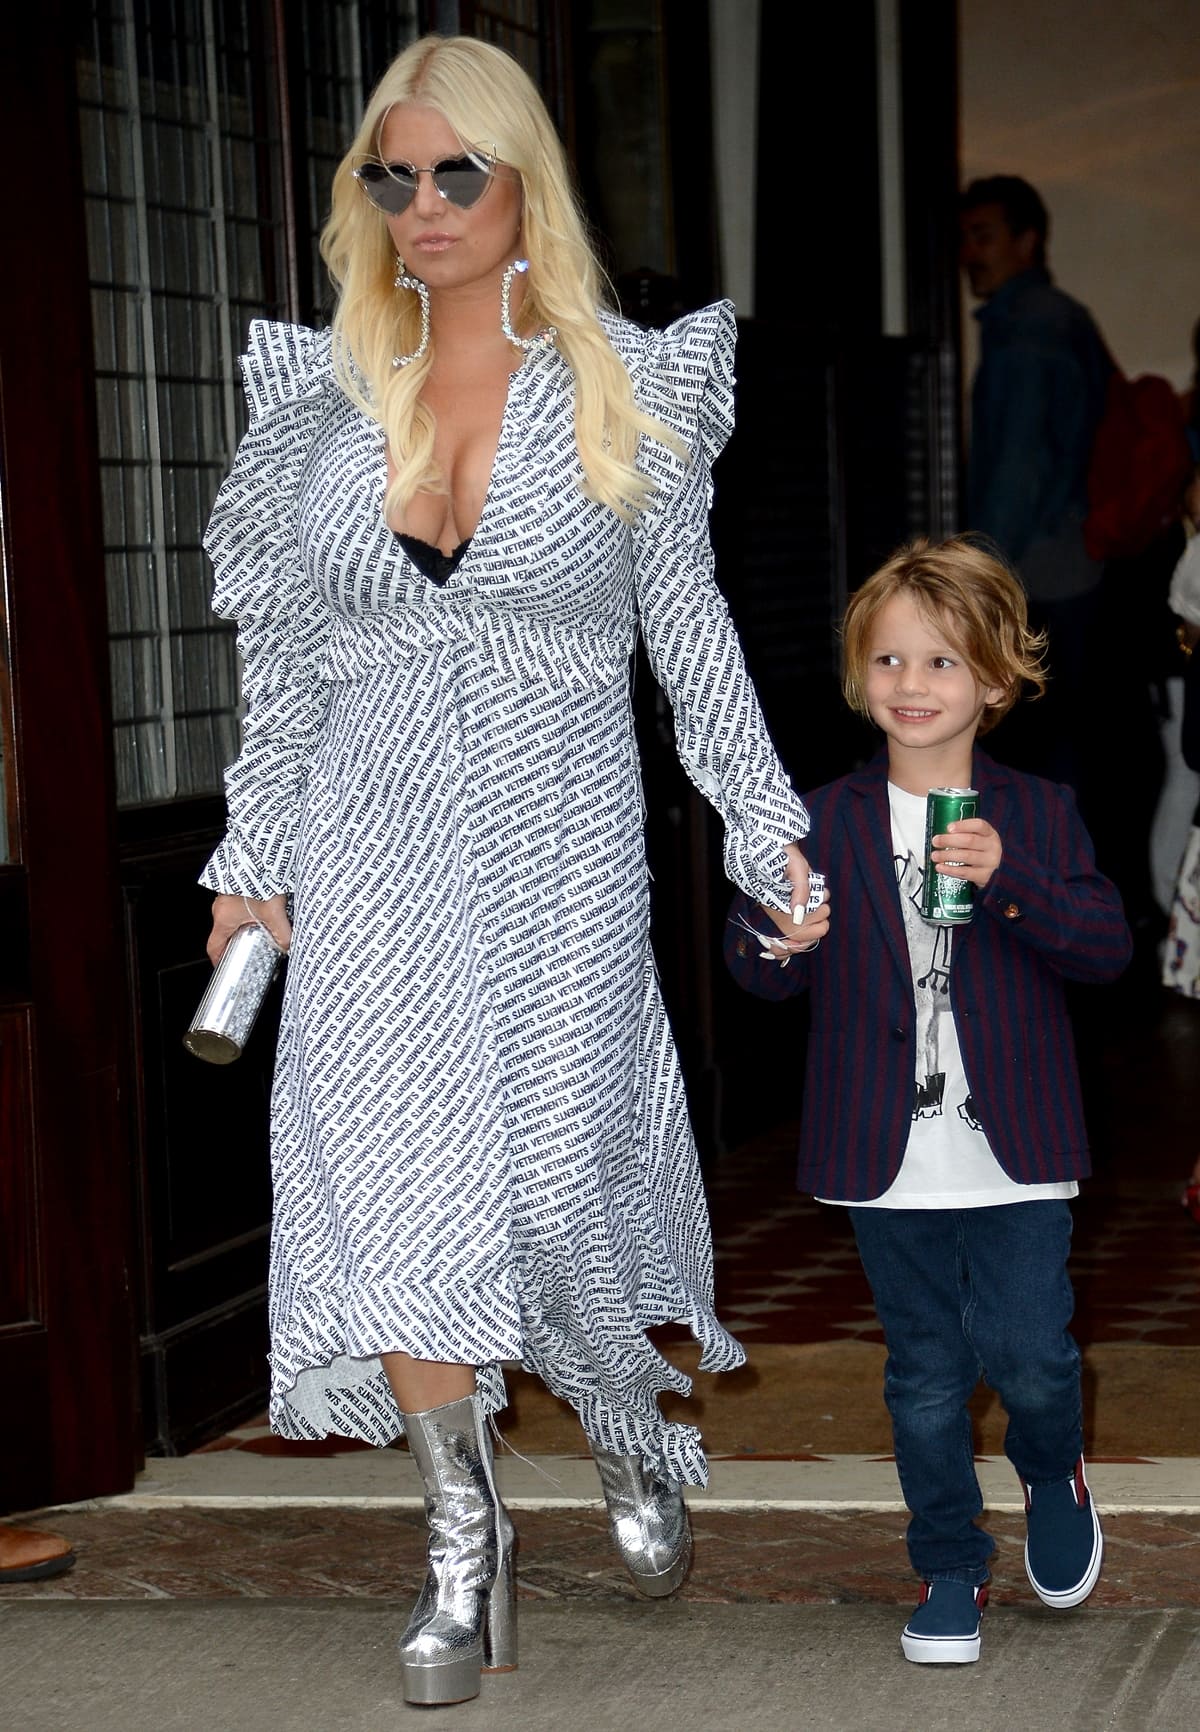 On May 10, 2018, in New York City, Jessica Simpson, joined by Ace Knute Johnson, showcased a bold and eclectic fashion statement in a Vetements ruffled printed jersey dress, paired with metallic textured-leather platform ankle boots by Vetements, Saint Laurent Lou Lou heart sunglasses in silver, and Saint Laurent XL smoking oval drop crystal earrings